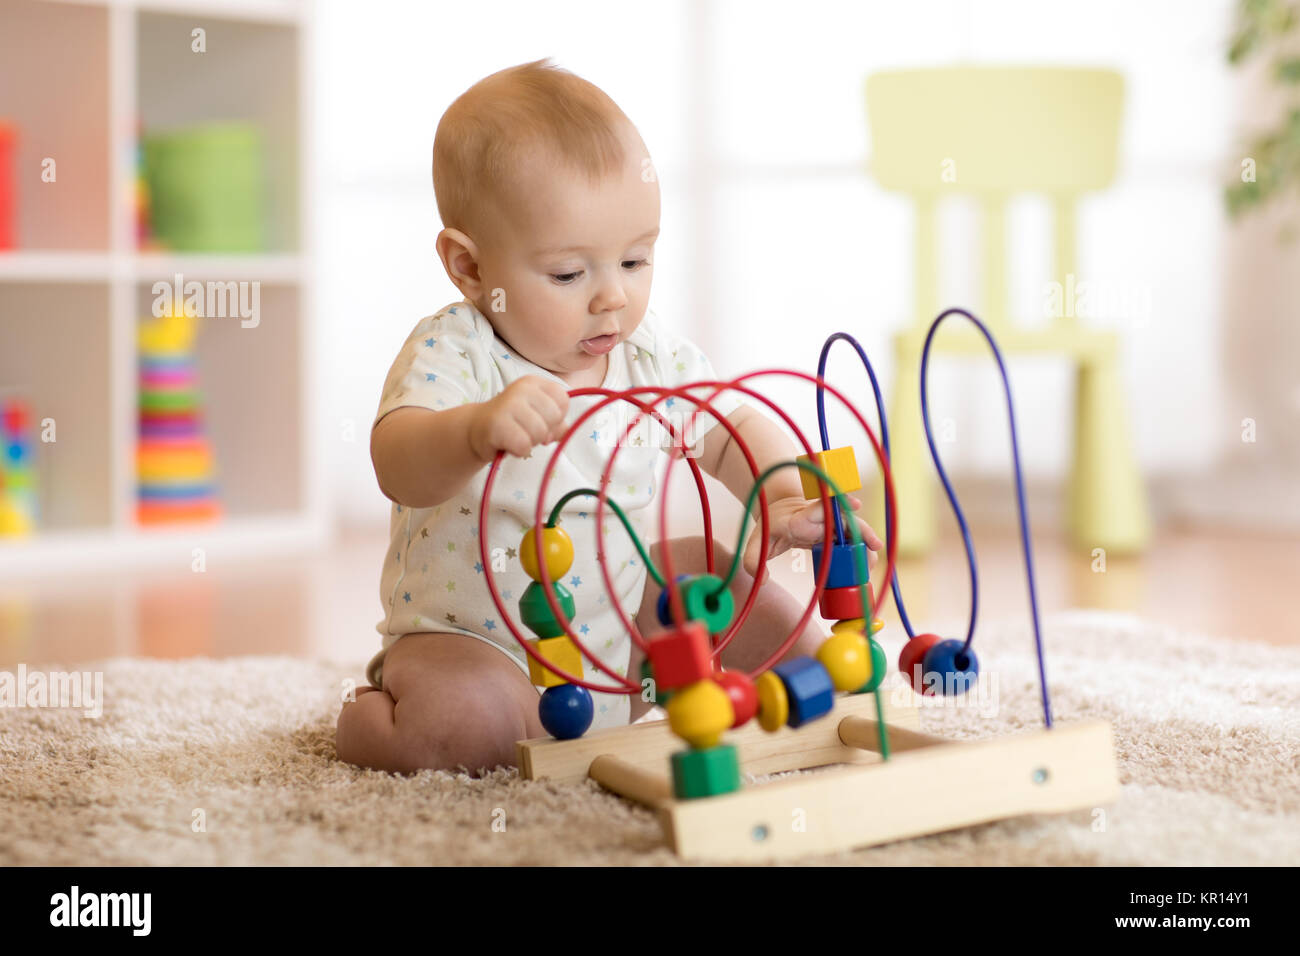 baby playing with educational toy in nursery Stock Photo